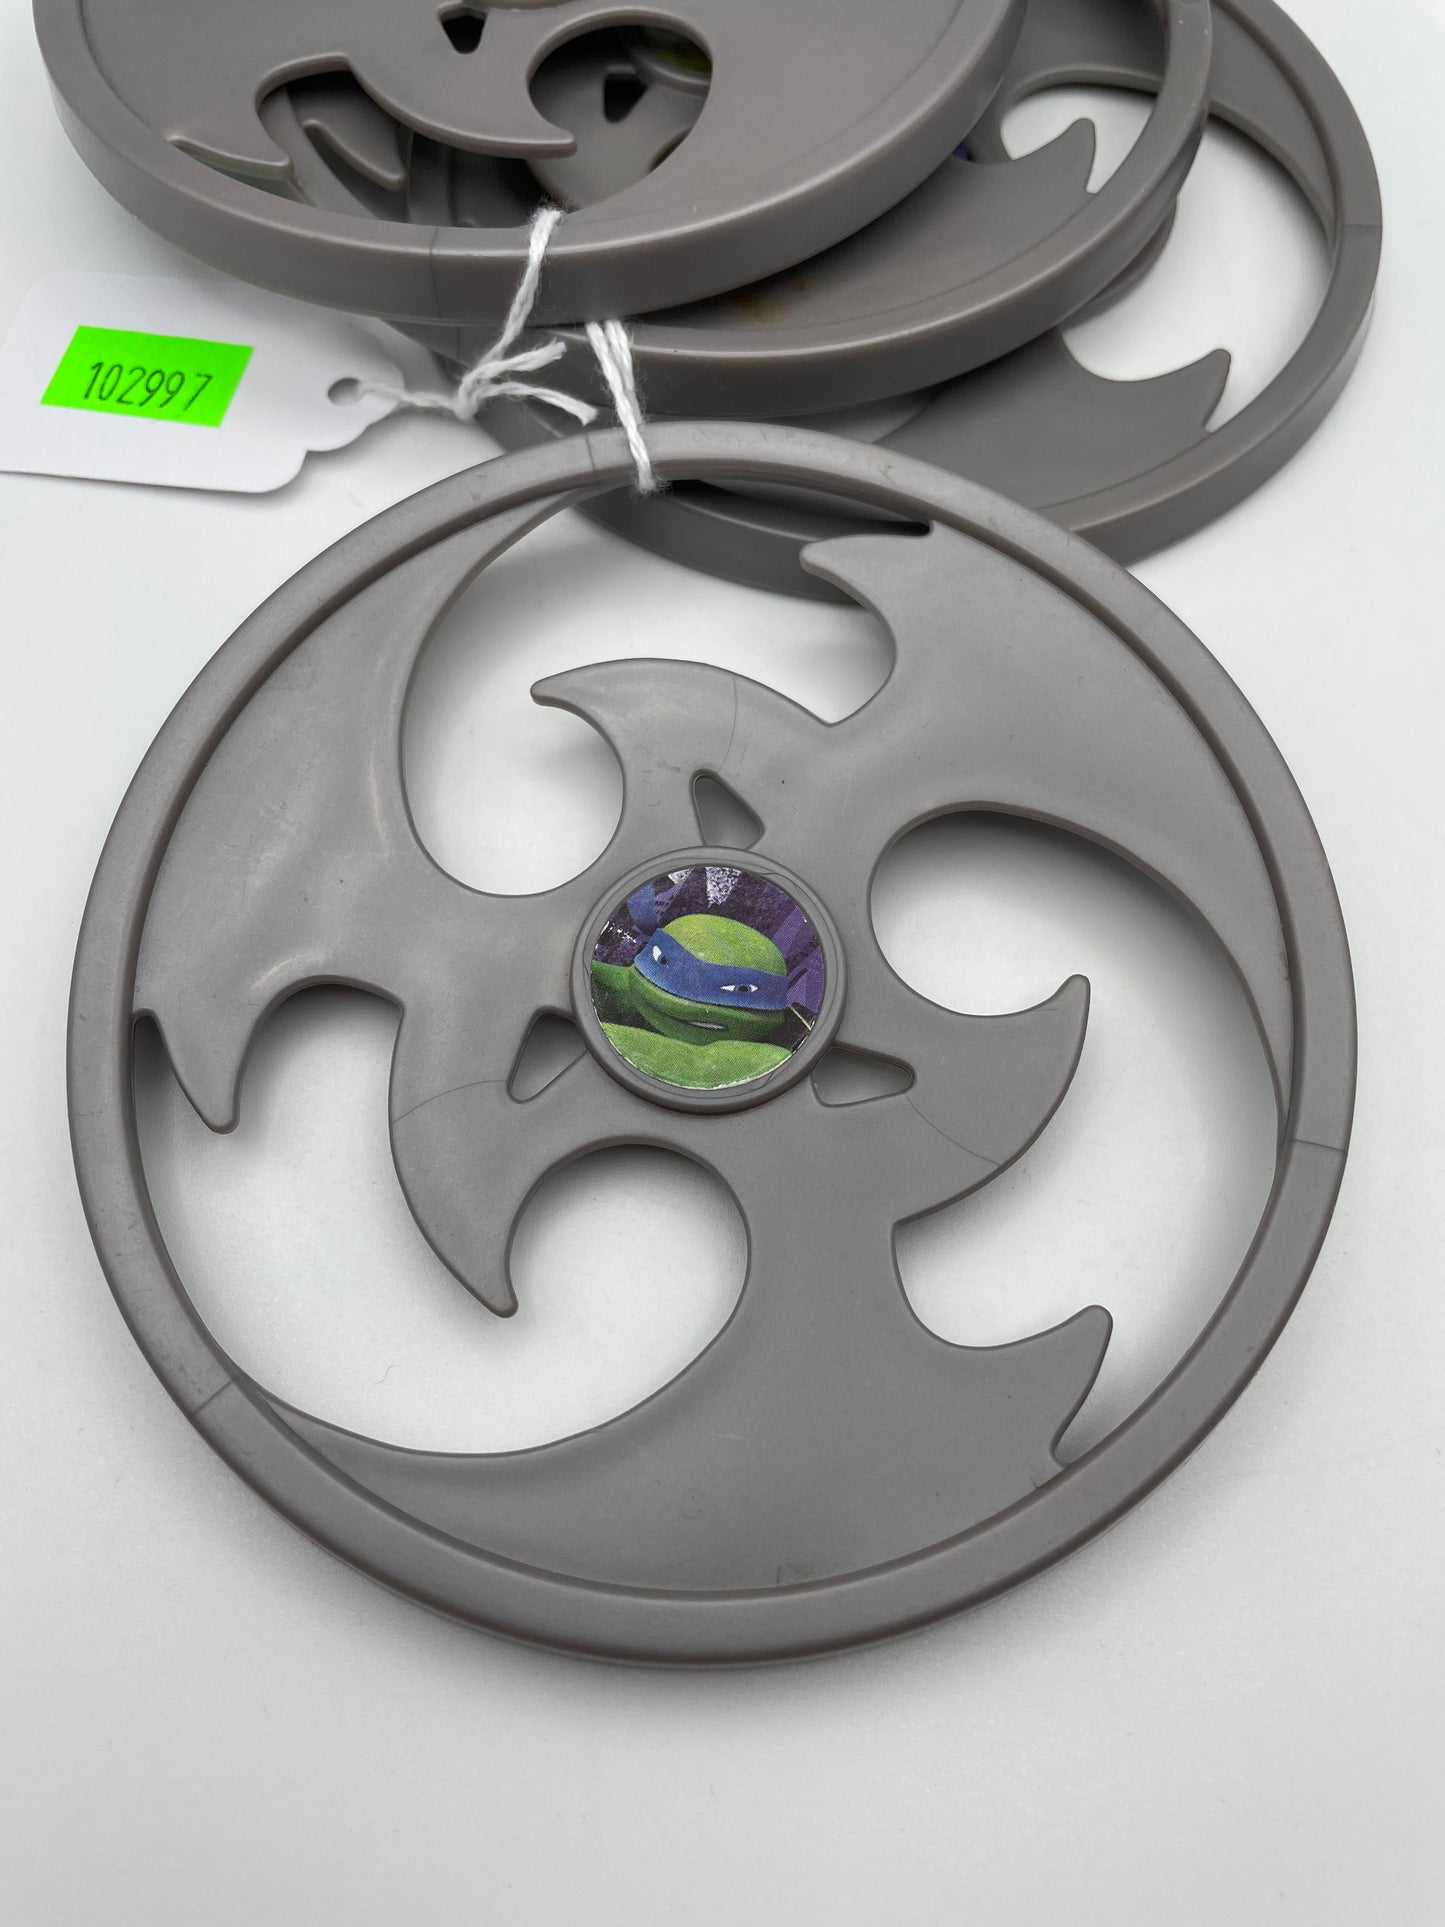 TMNT - Four Throwing Disks 2012 #102997